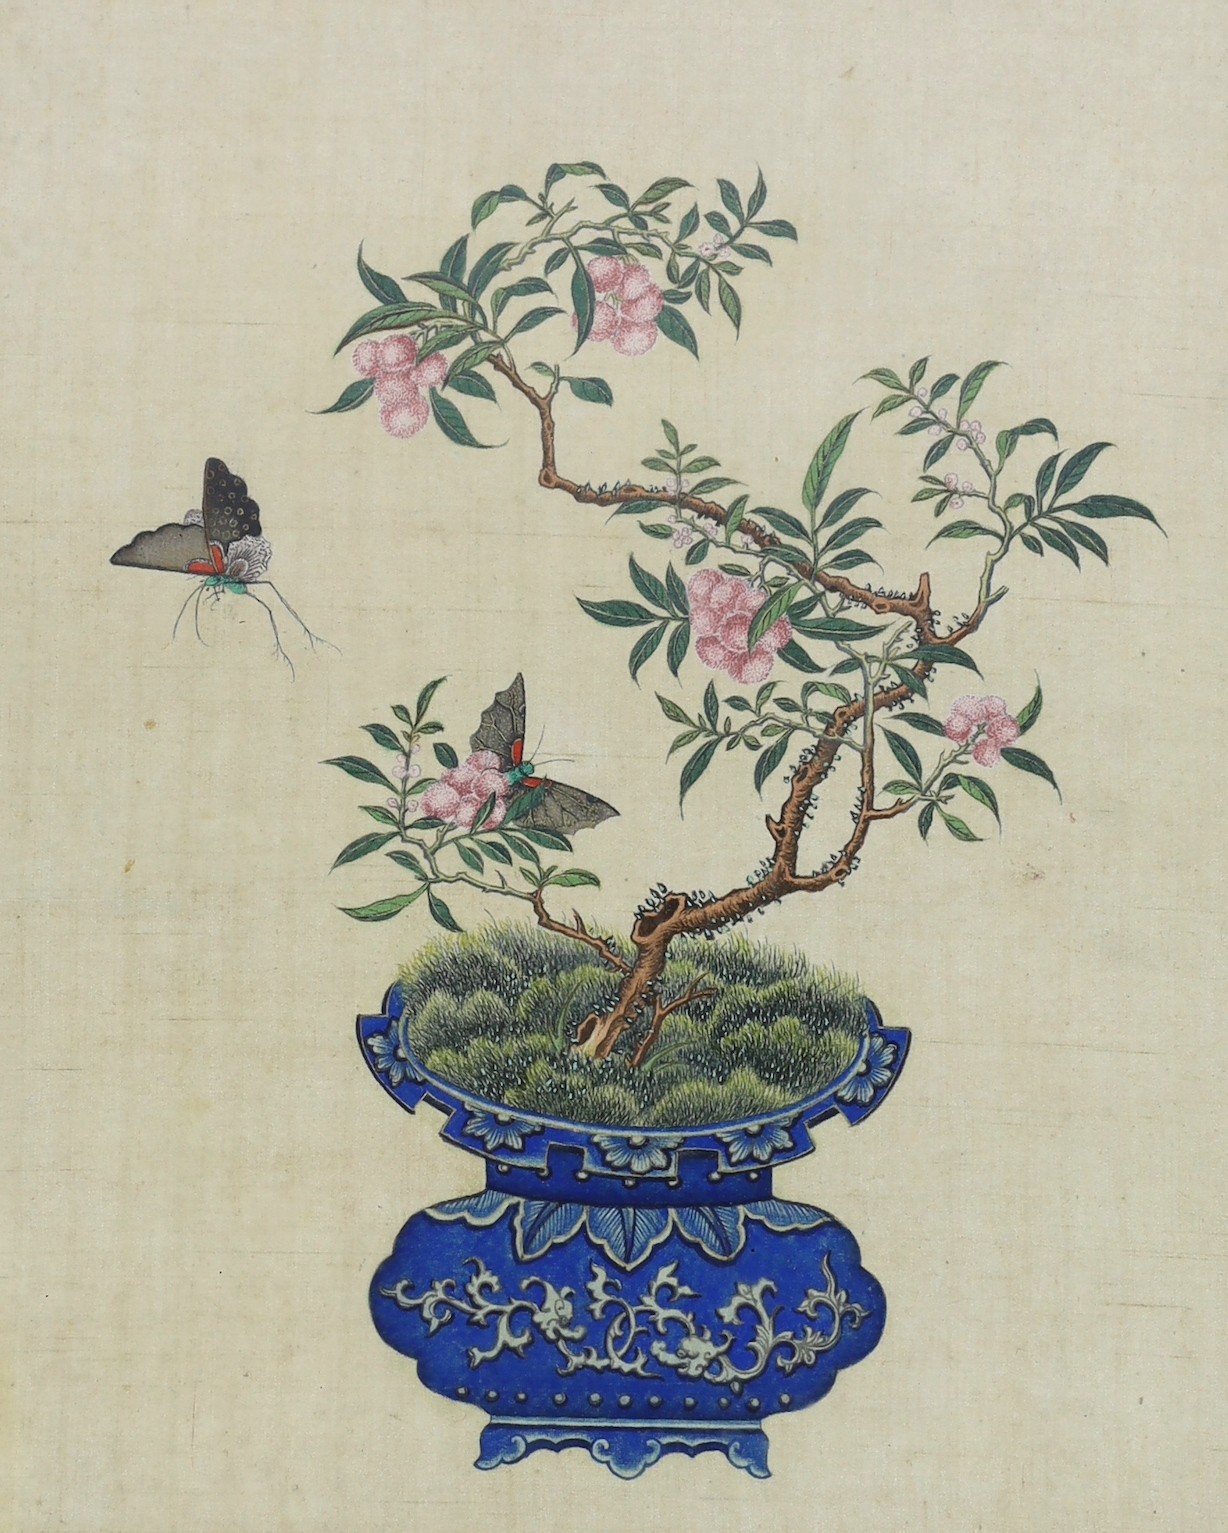 A Chinese painting on silk of a blue glazed jardiniere containing a lychee plant with butterflies, late 19th/early 20th century, image 35cm x 28 cm